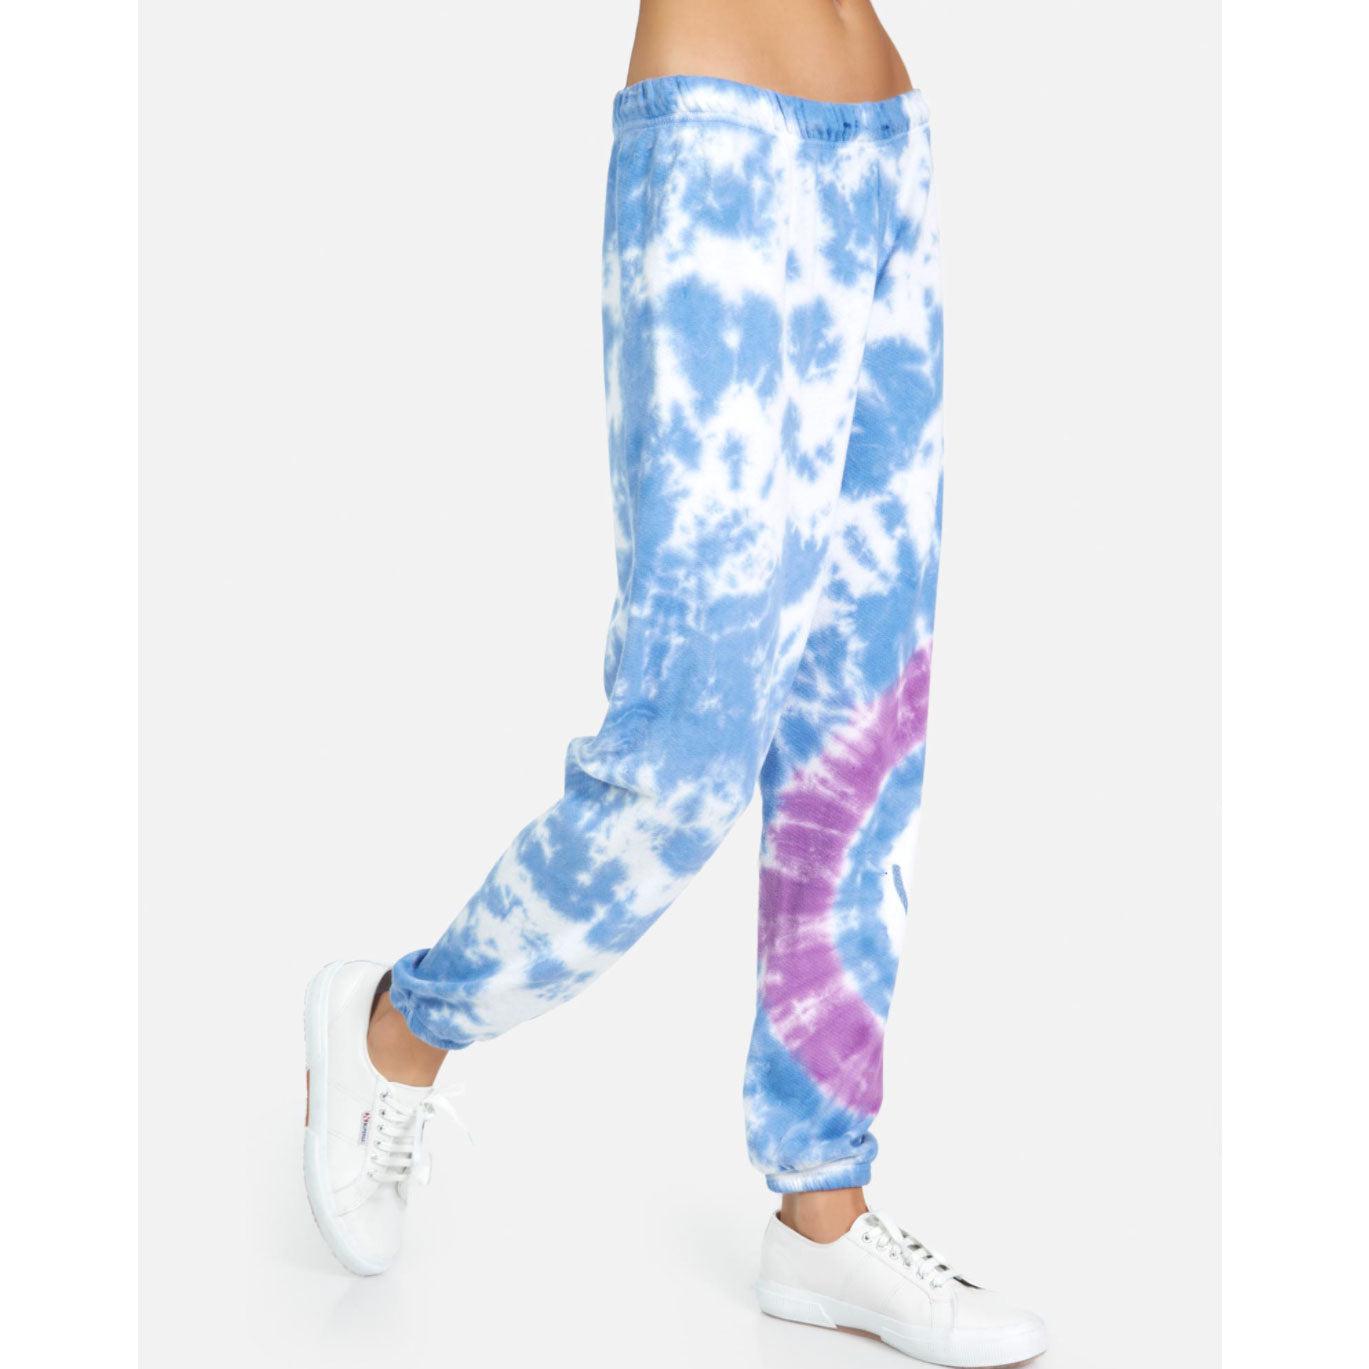 TANZY PEACE HAPPY FACE PANTS